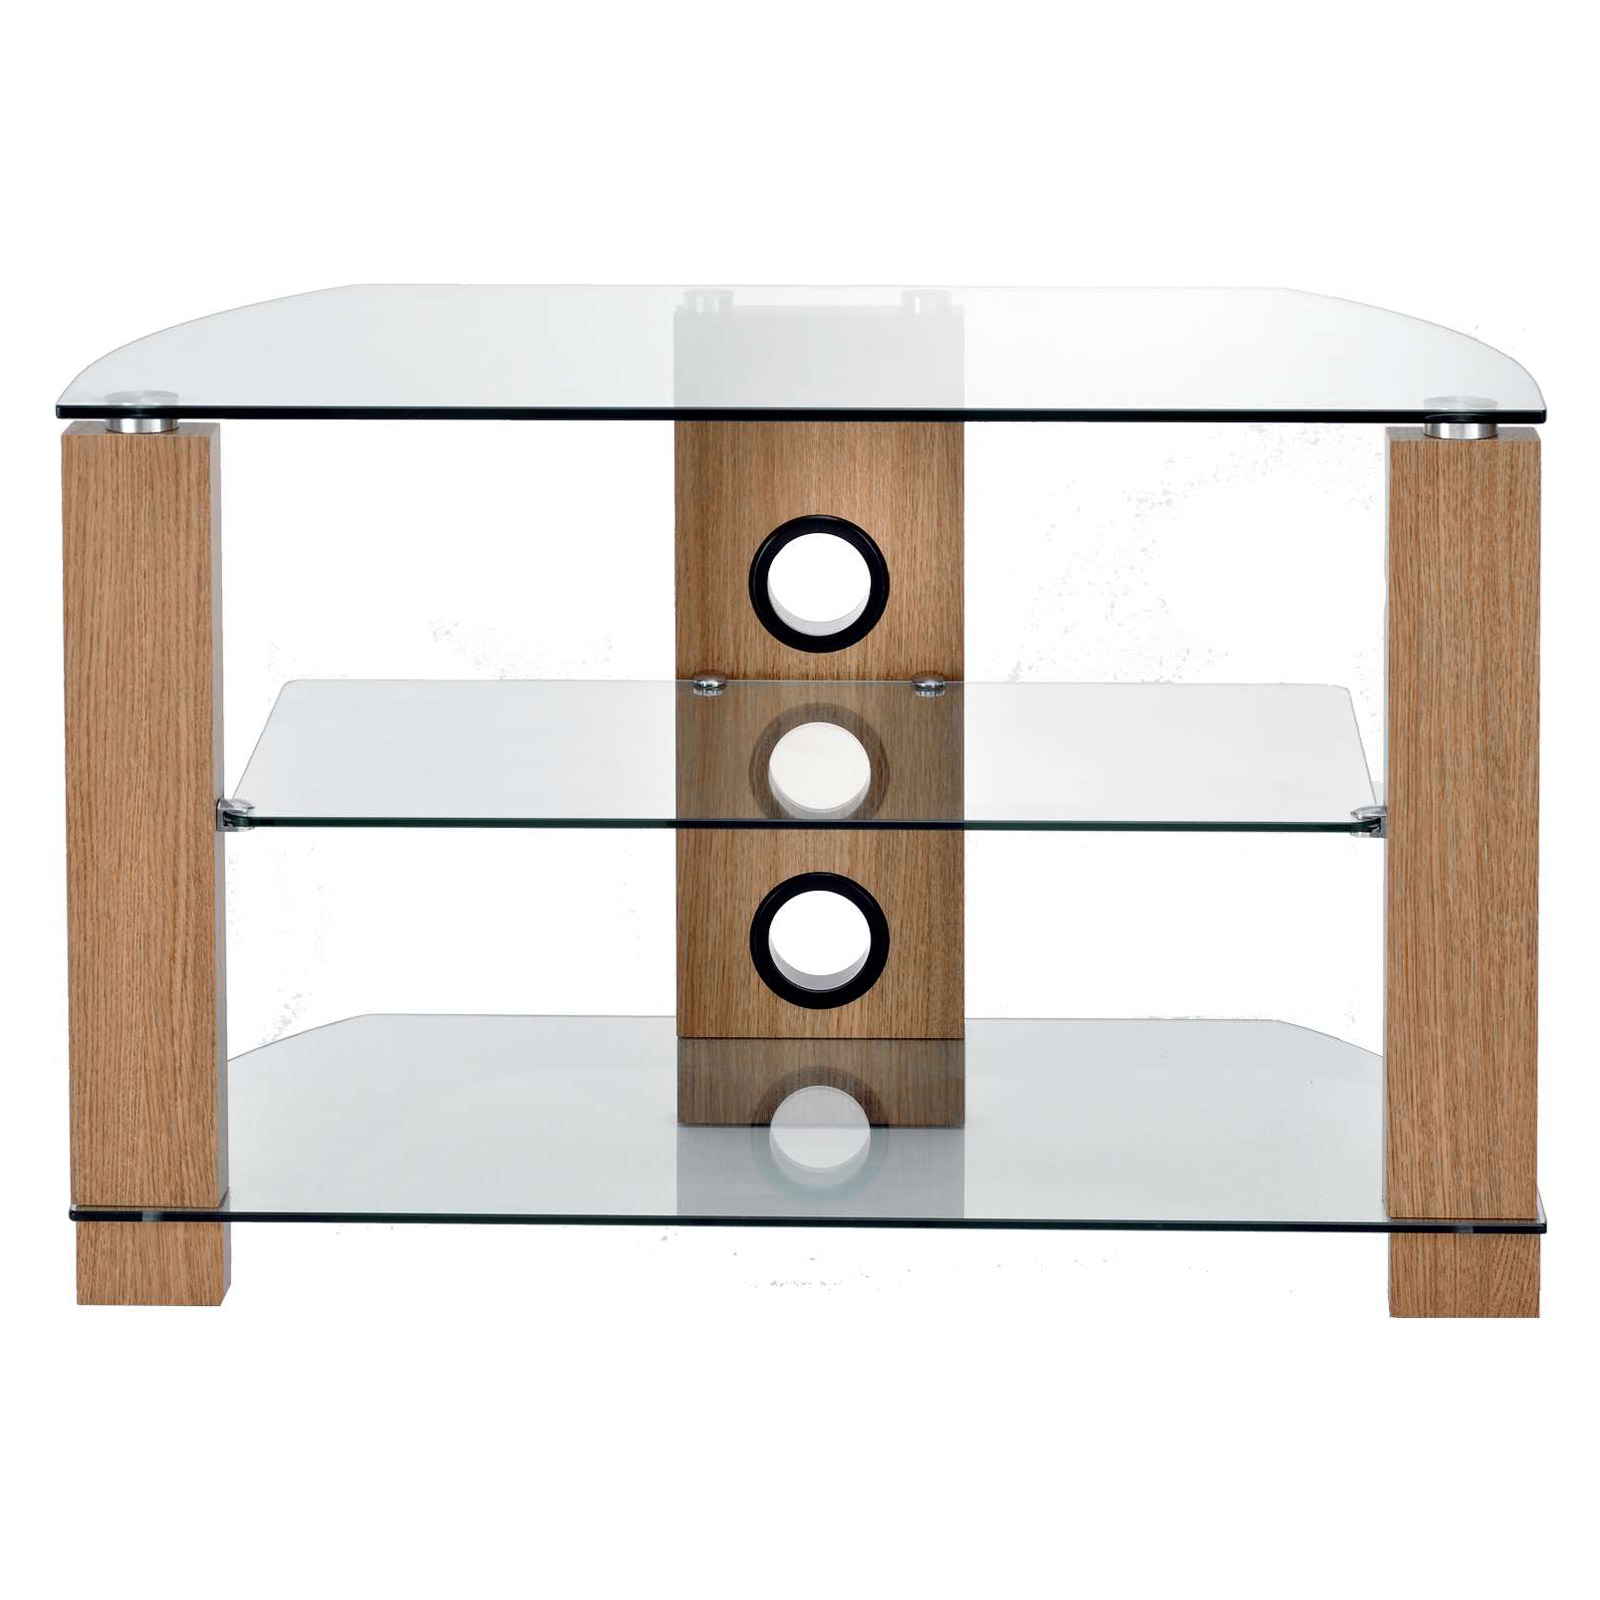 Image of TTAP L630 1050 3O Vision 1050mm TV Stand in Light Oak with Clear Glass